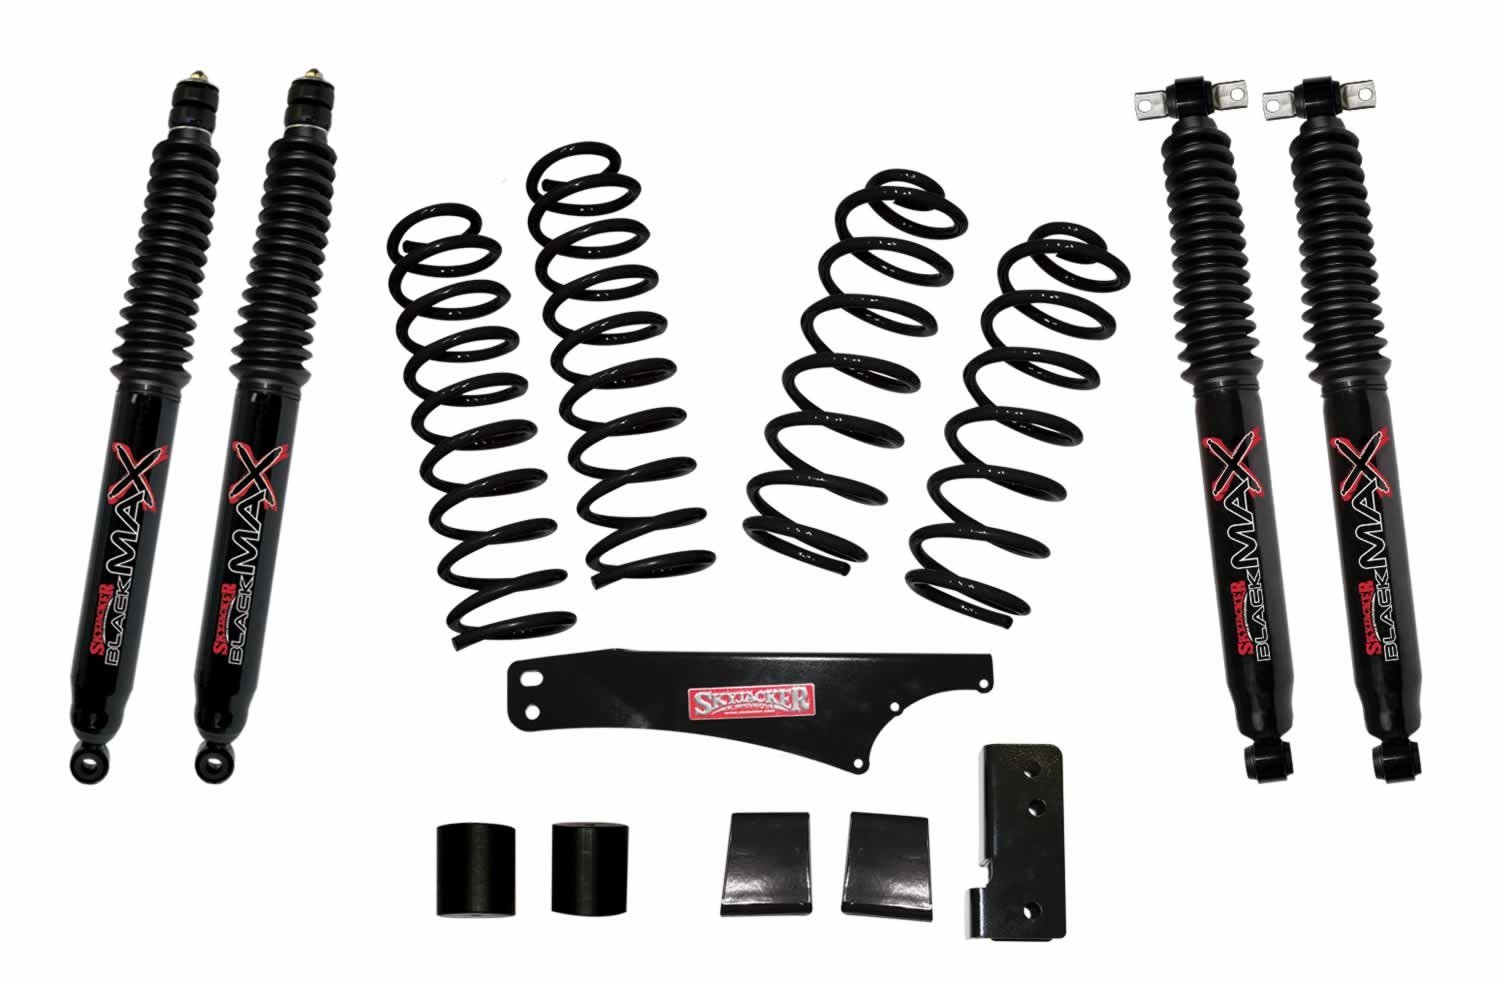 JK25BPBSR Front and Rear Suspension Lift Kit, Lift Amount: 2.5 in. Front/2.5 in. Rear